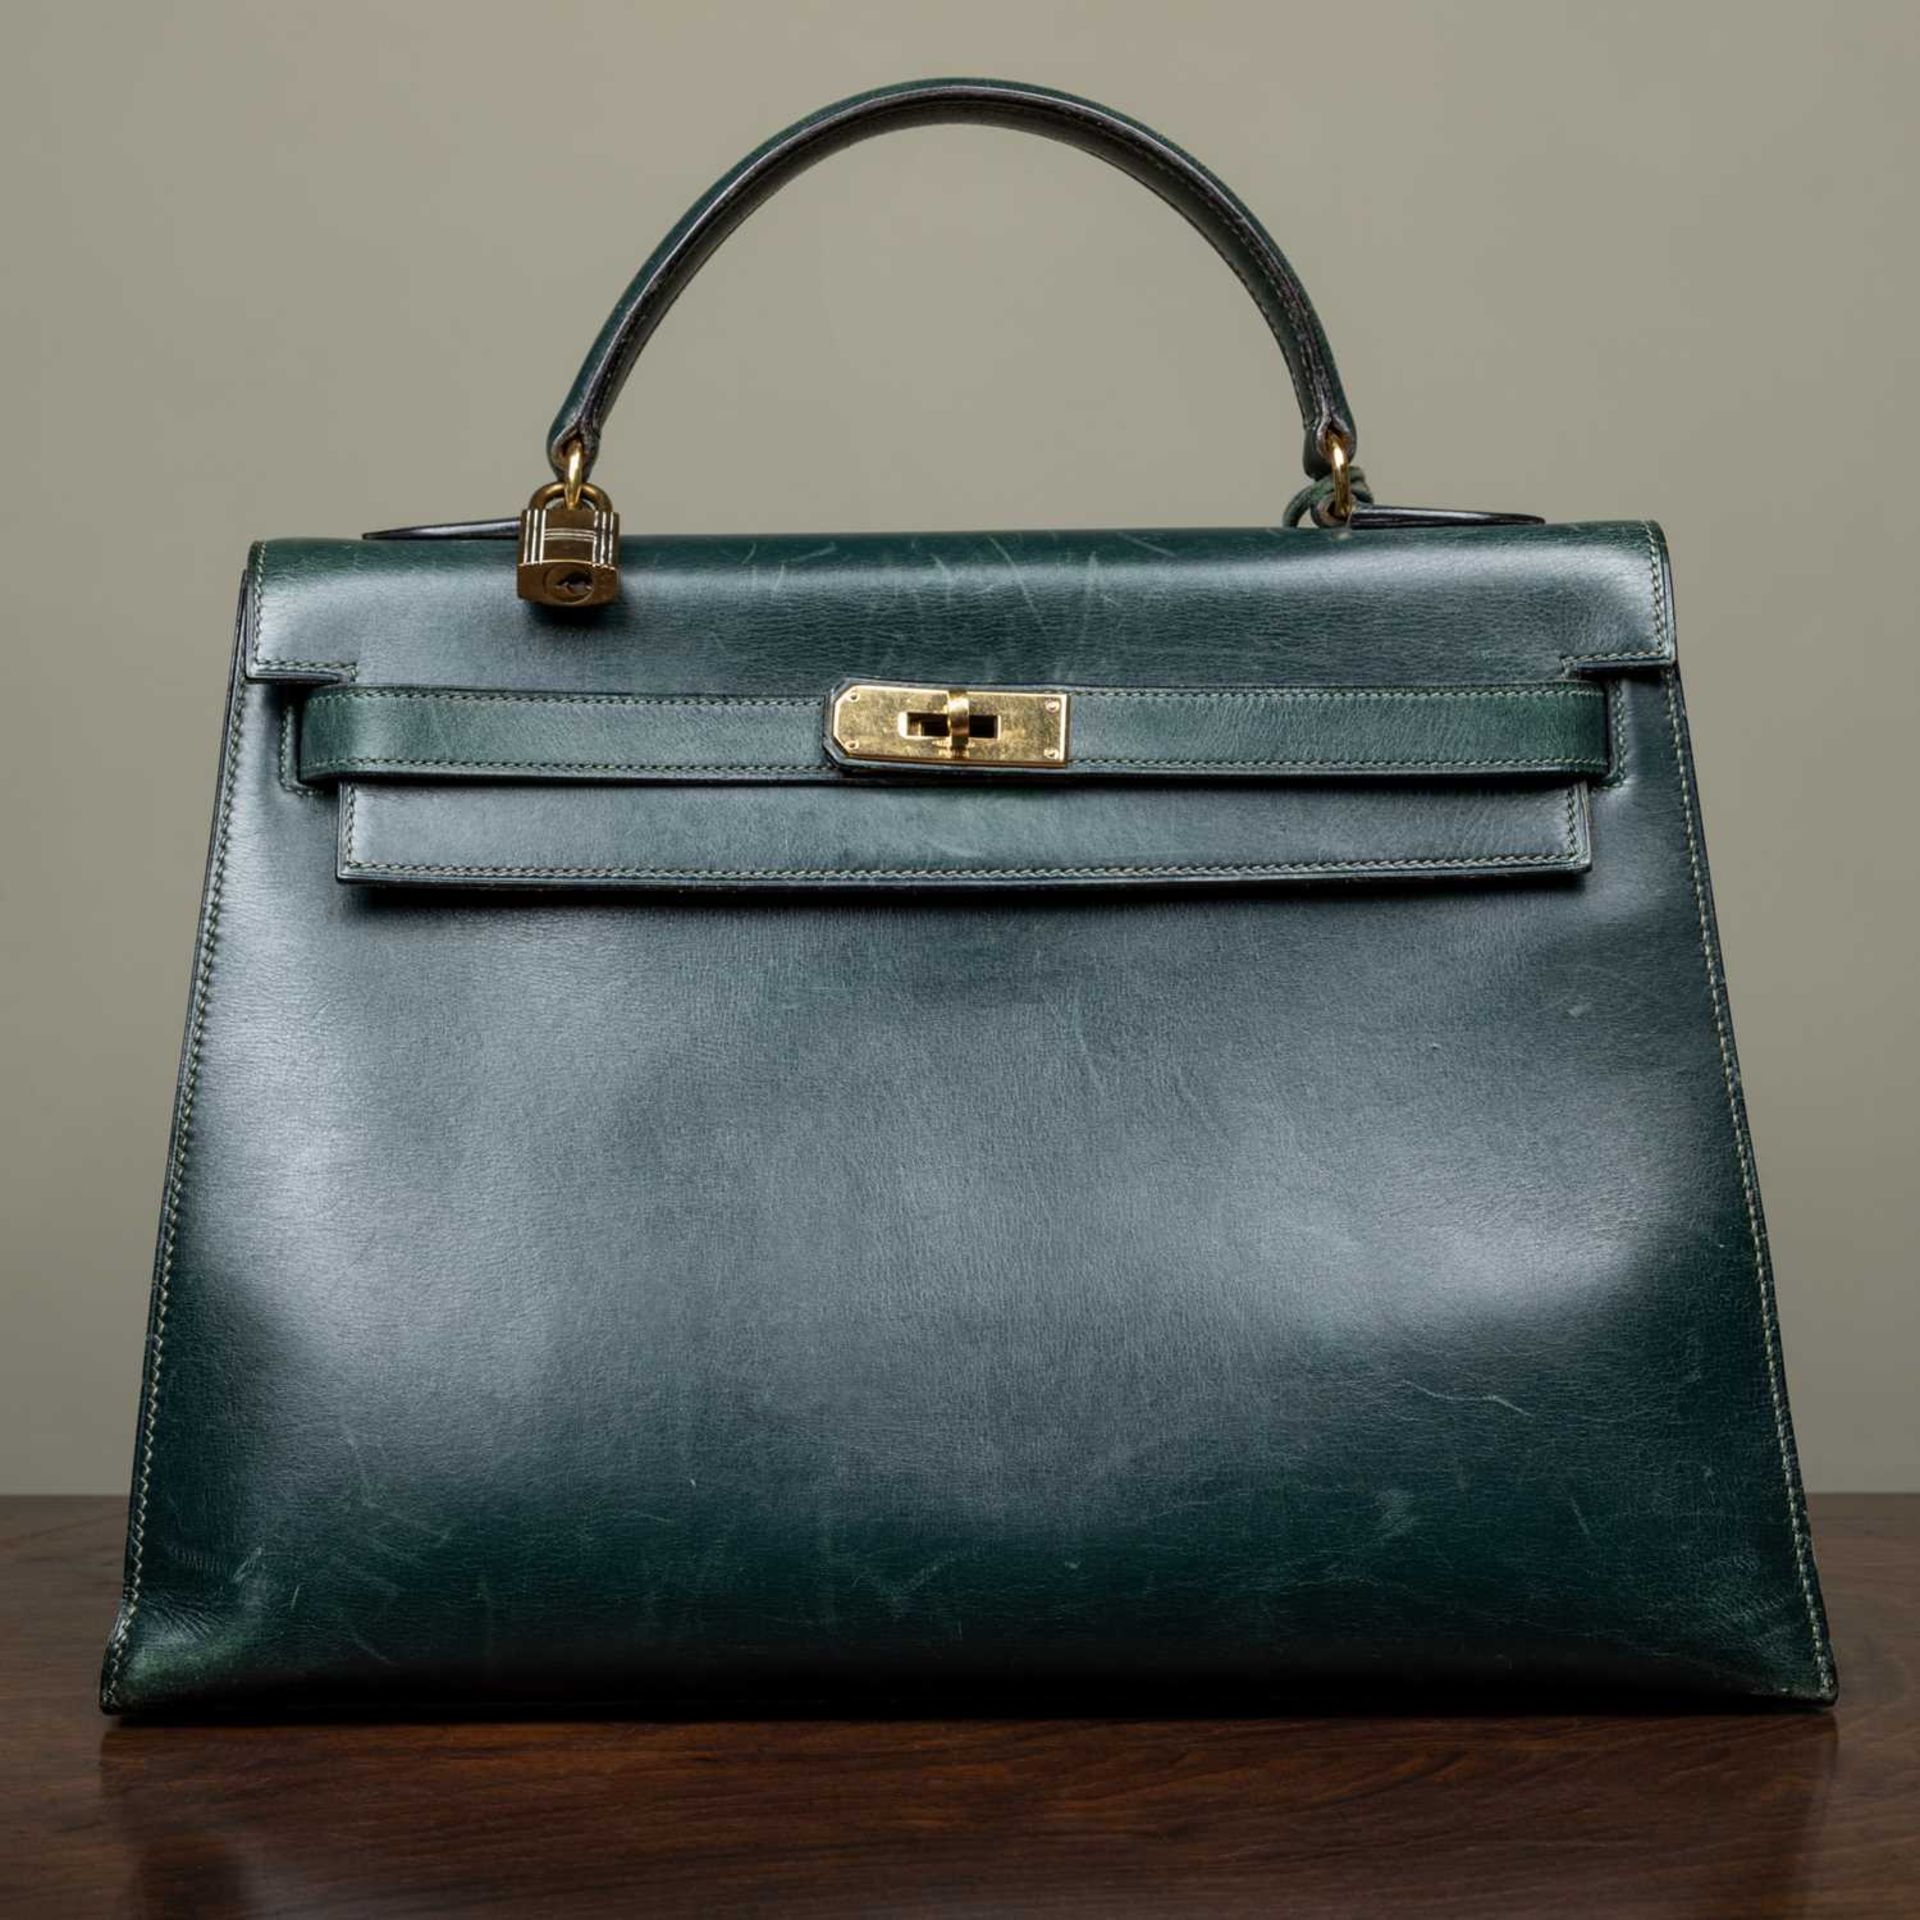 A Hermès 'Kelly' green leather handbag and matching jewellery case, the bag 33cm wide at the base - Image 2 of 18